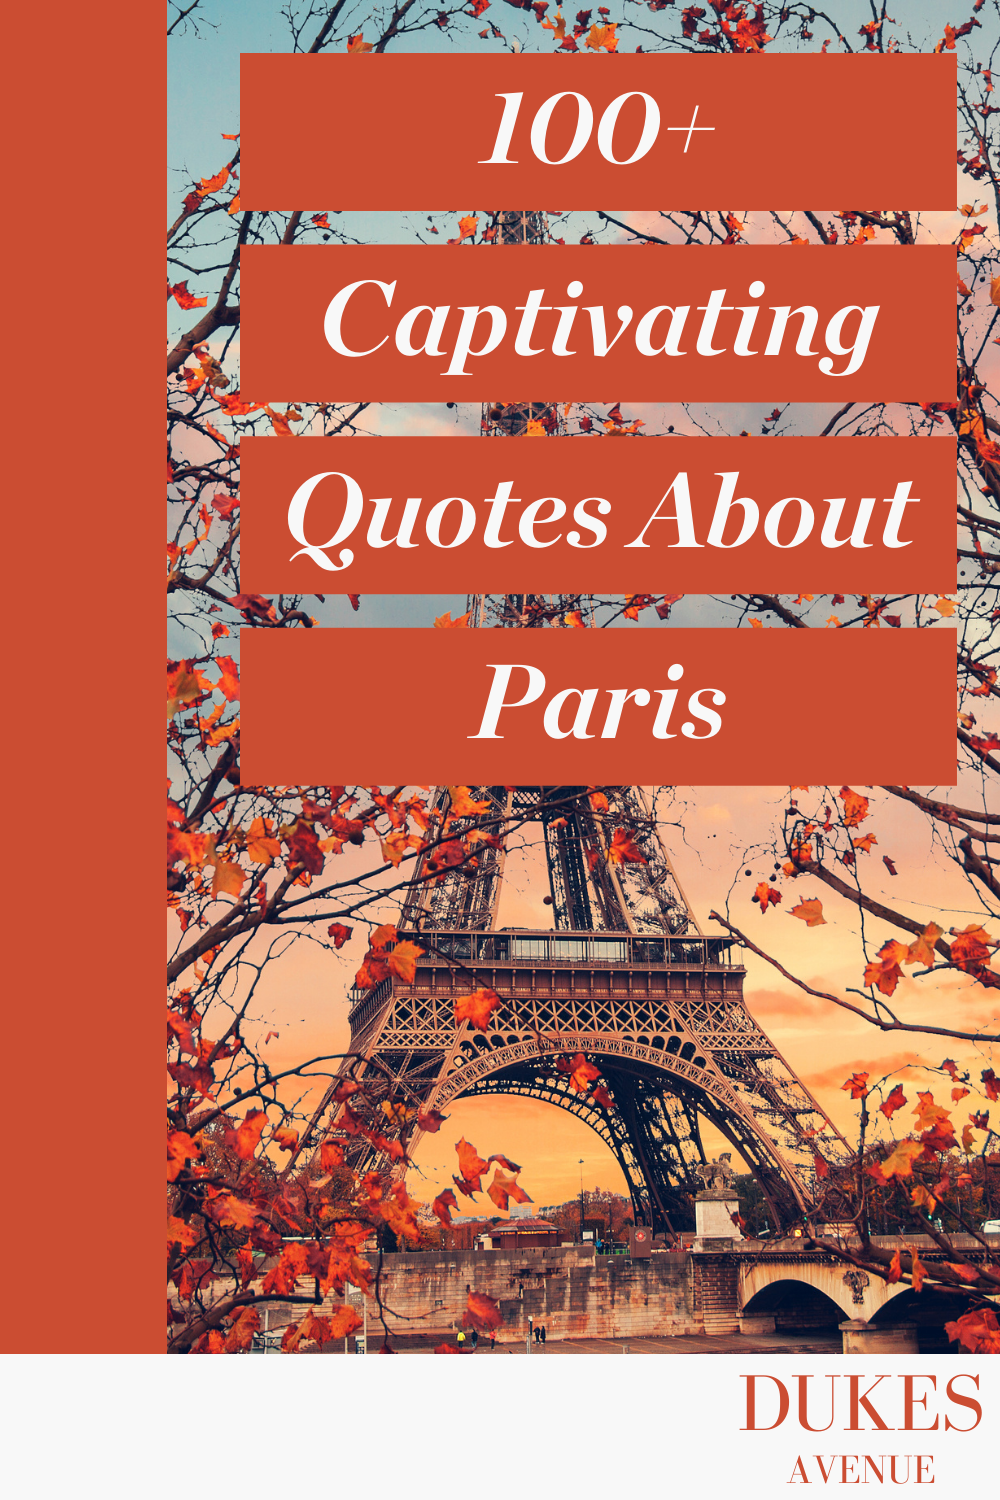 Image of the Eiffel Tower during autumn with text overlay '100+ captivating quotes about Paris'